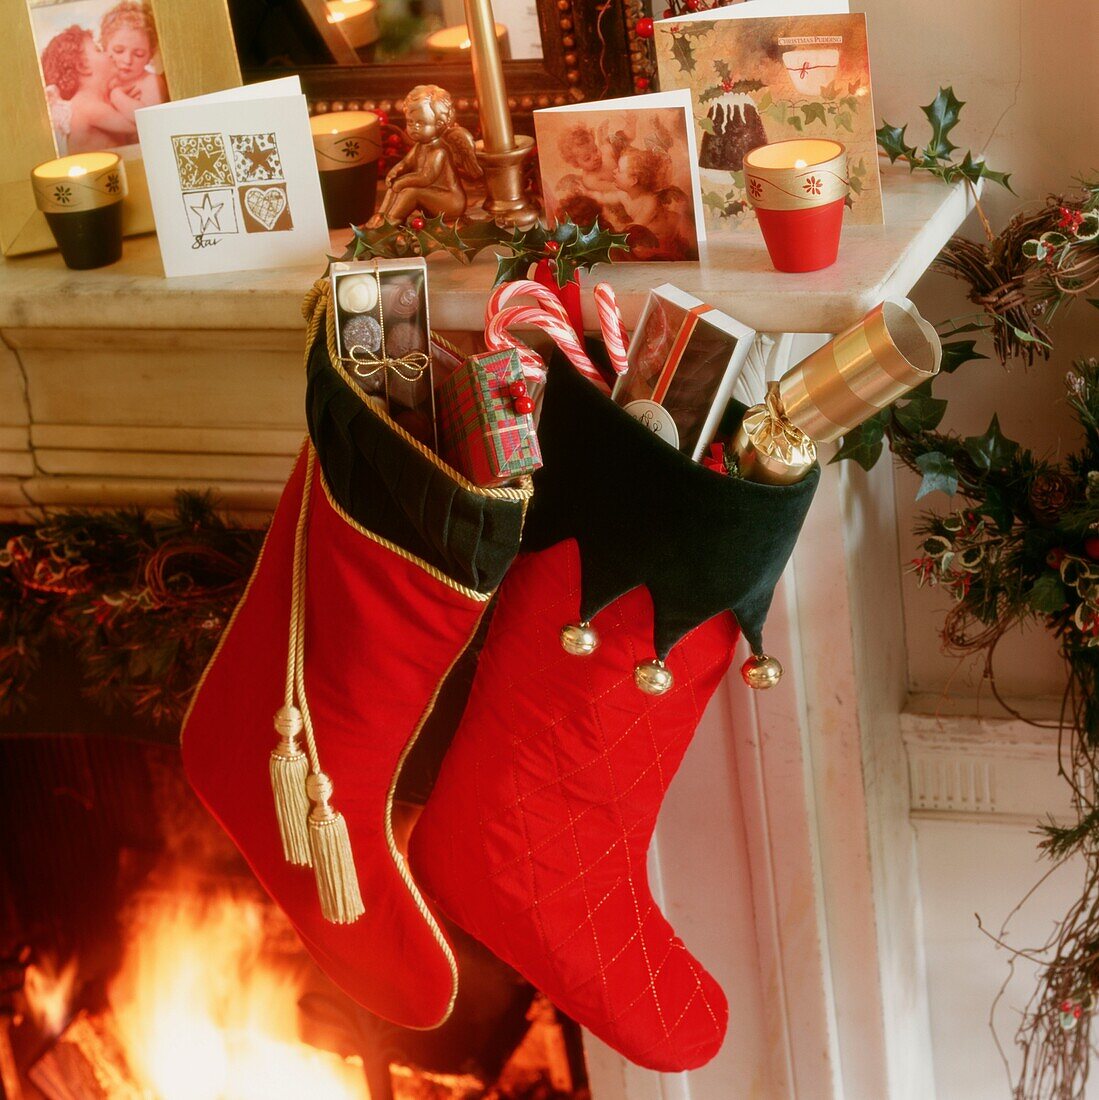 Two Christmas stockings hang beside open fire